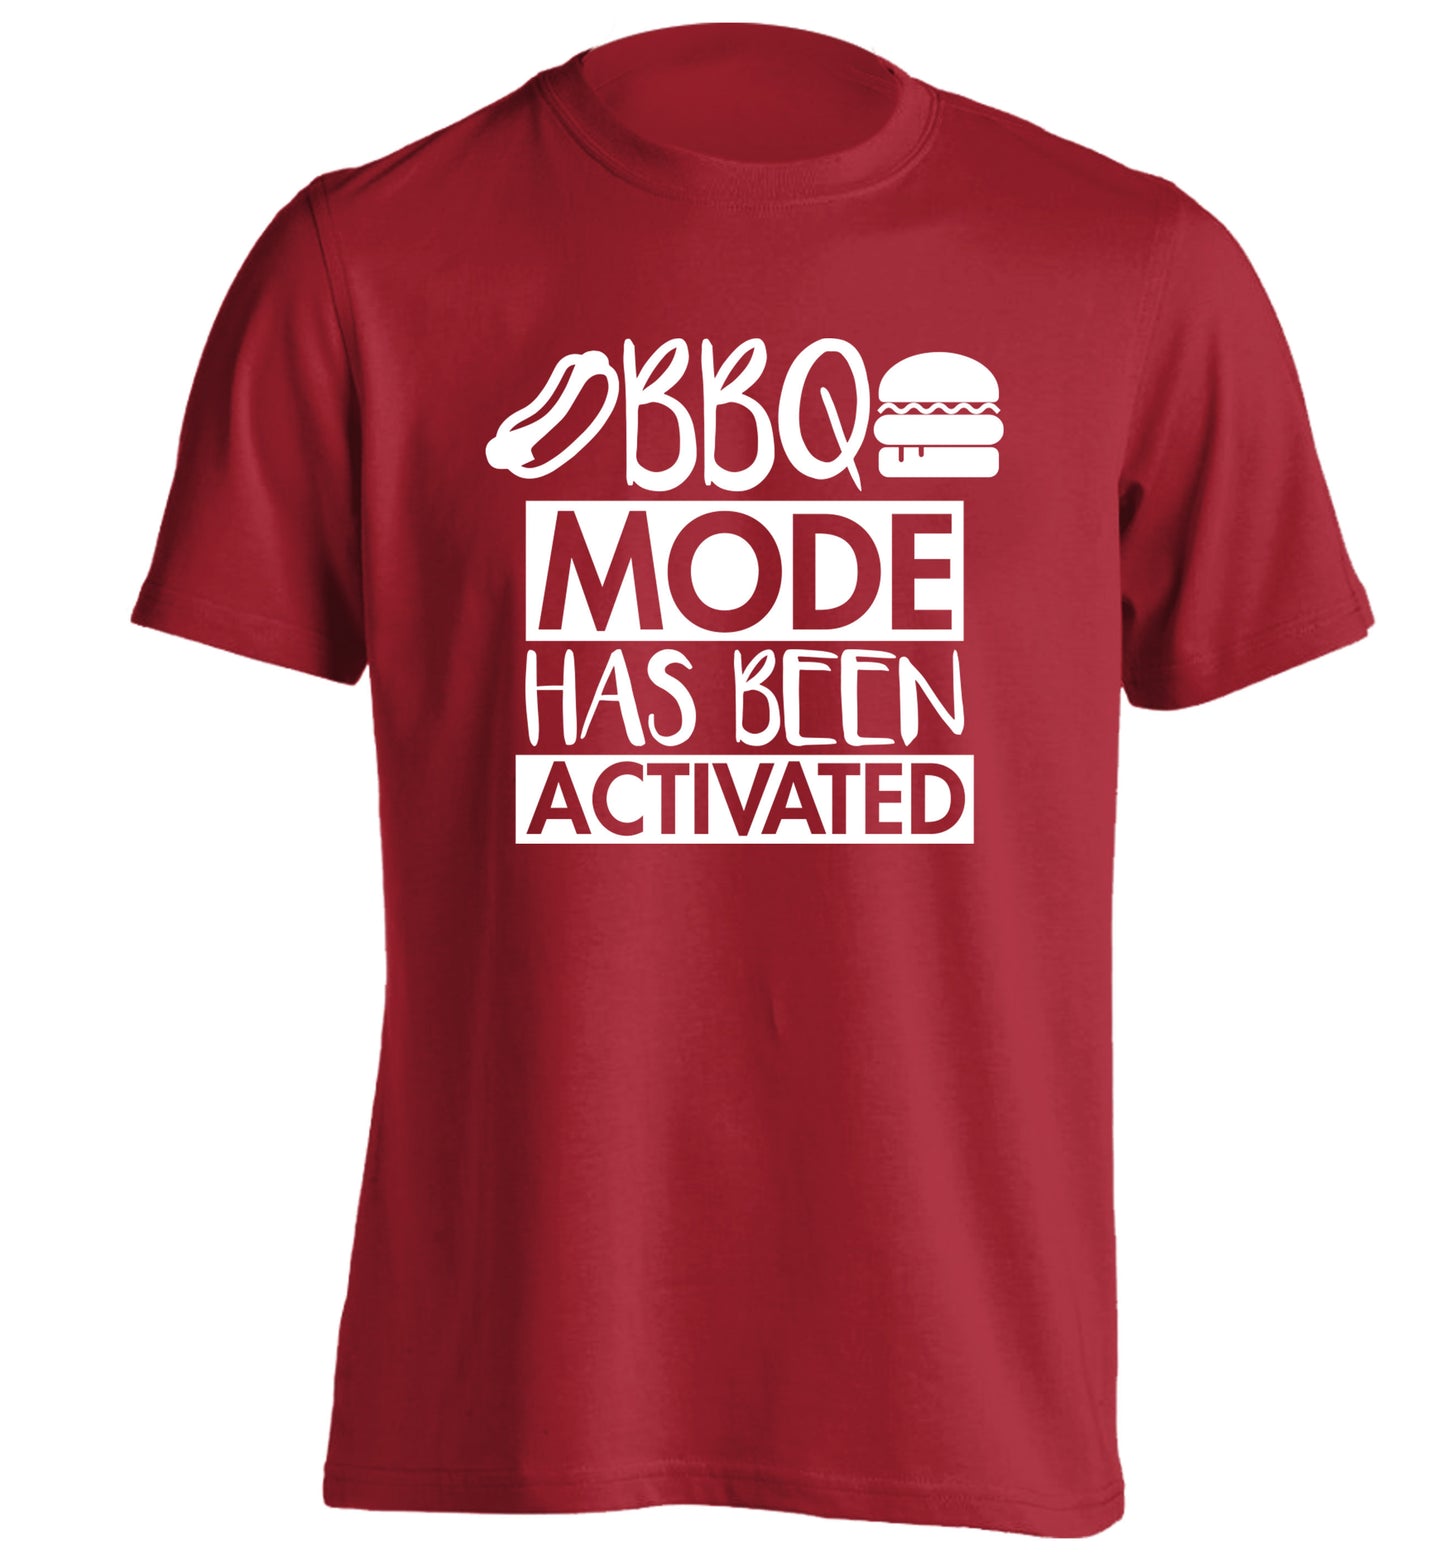 Bbq mode has been activated adults unisex red Tshirt 2XL